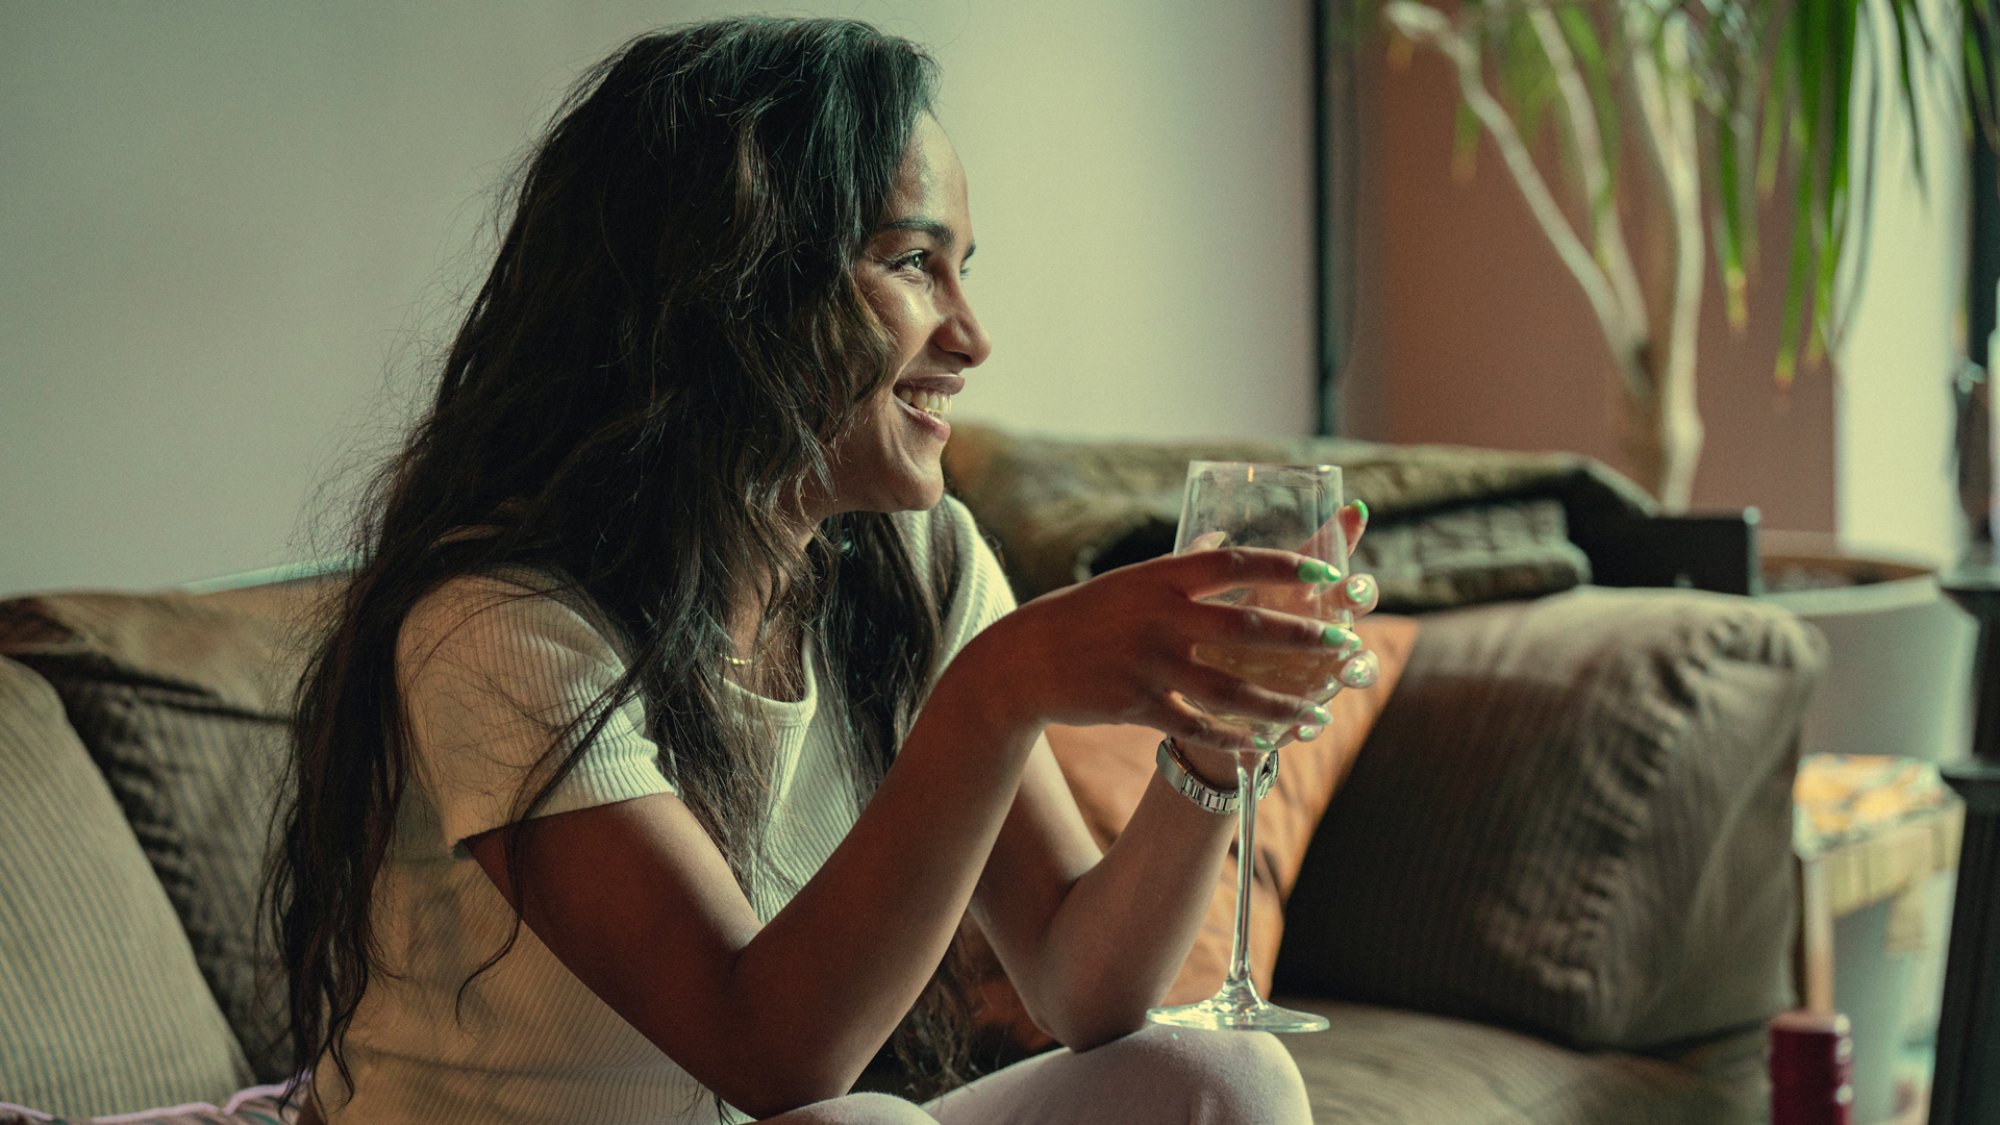 Saffron Hocking as Lauryn in "Top Boy", smiling and sitting on a couch with a glass of wine.